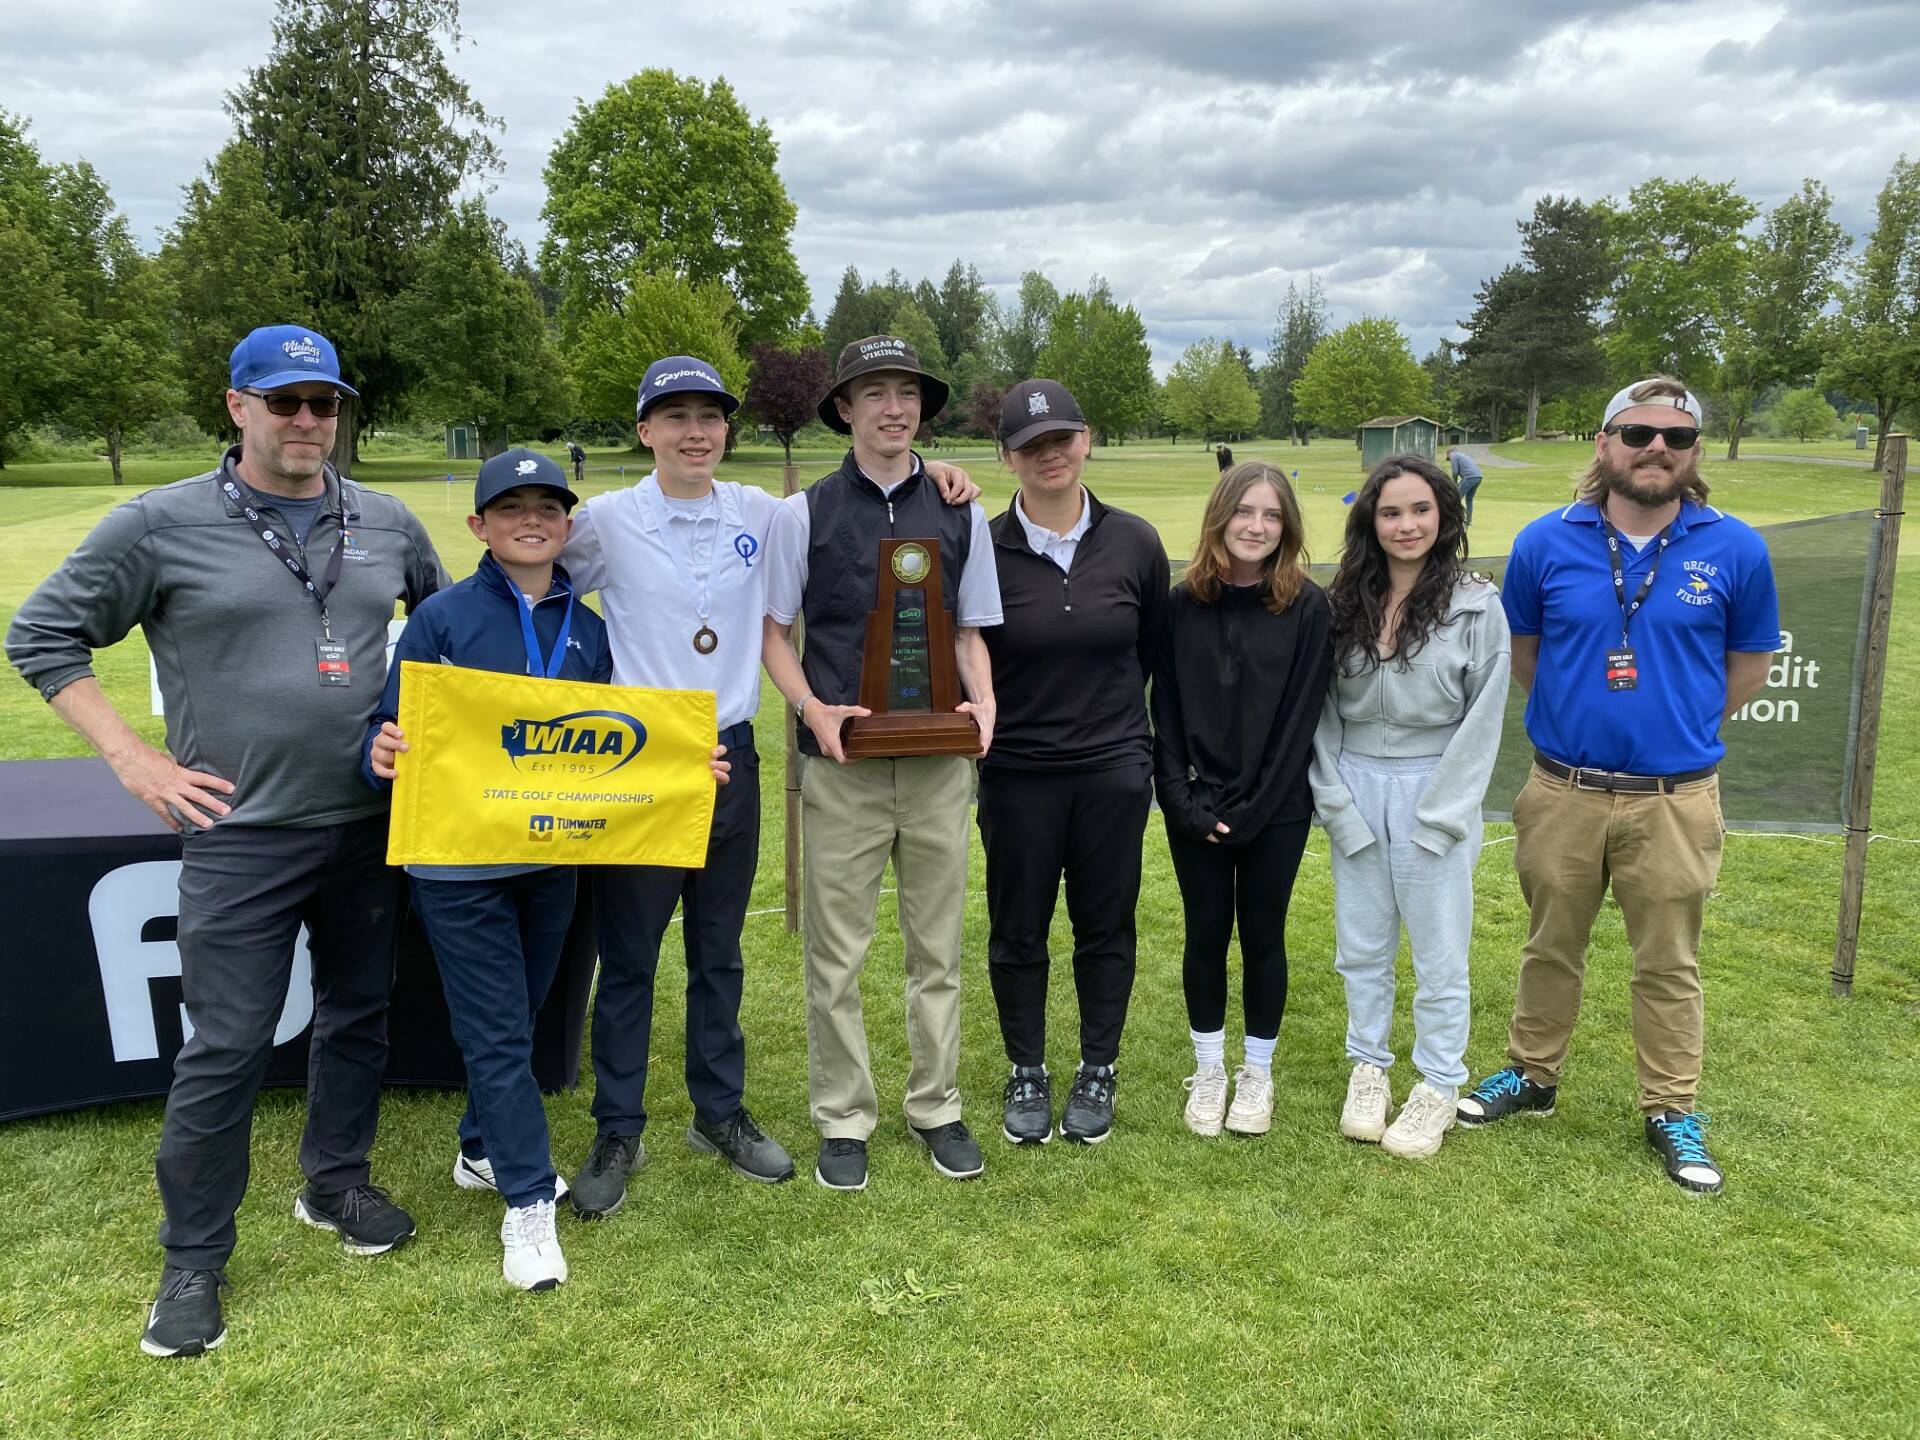 From left to right: Coach Chris Sutton, Joseph Anderson, Joshua Spinner, Sam Sutton, Lili Malo, Chloe Anderson-Cleveland, Vera Sasan, and coach Ryan Kennedy.